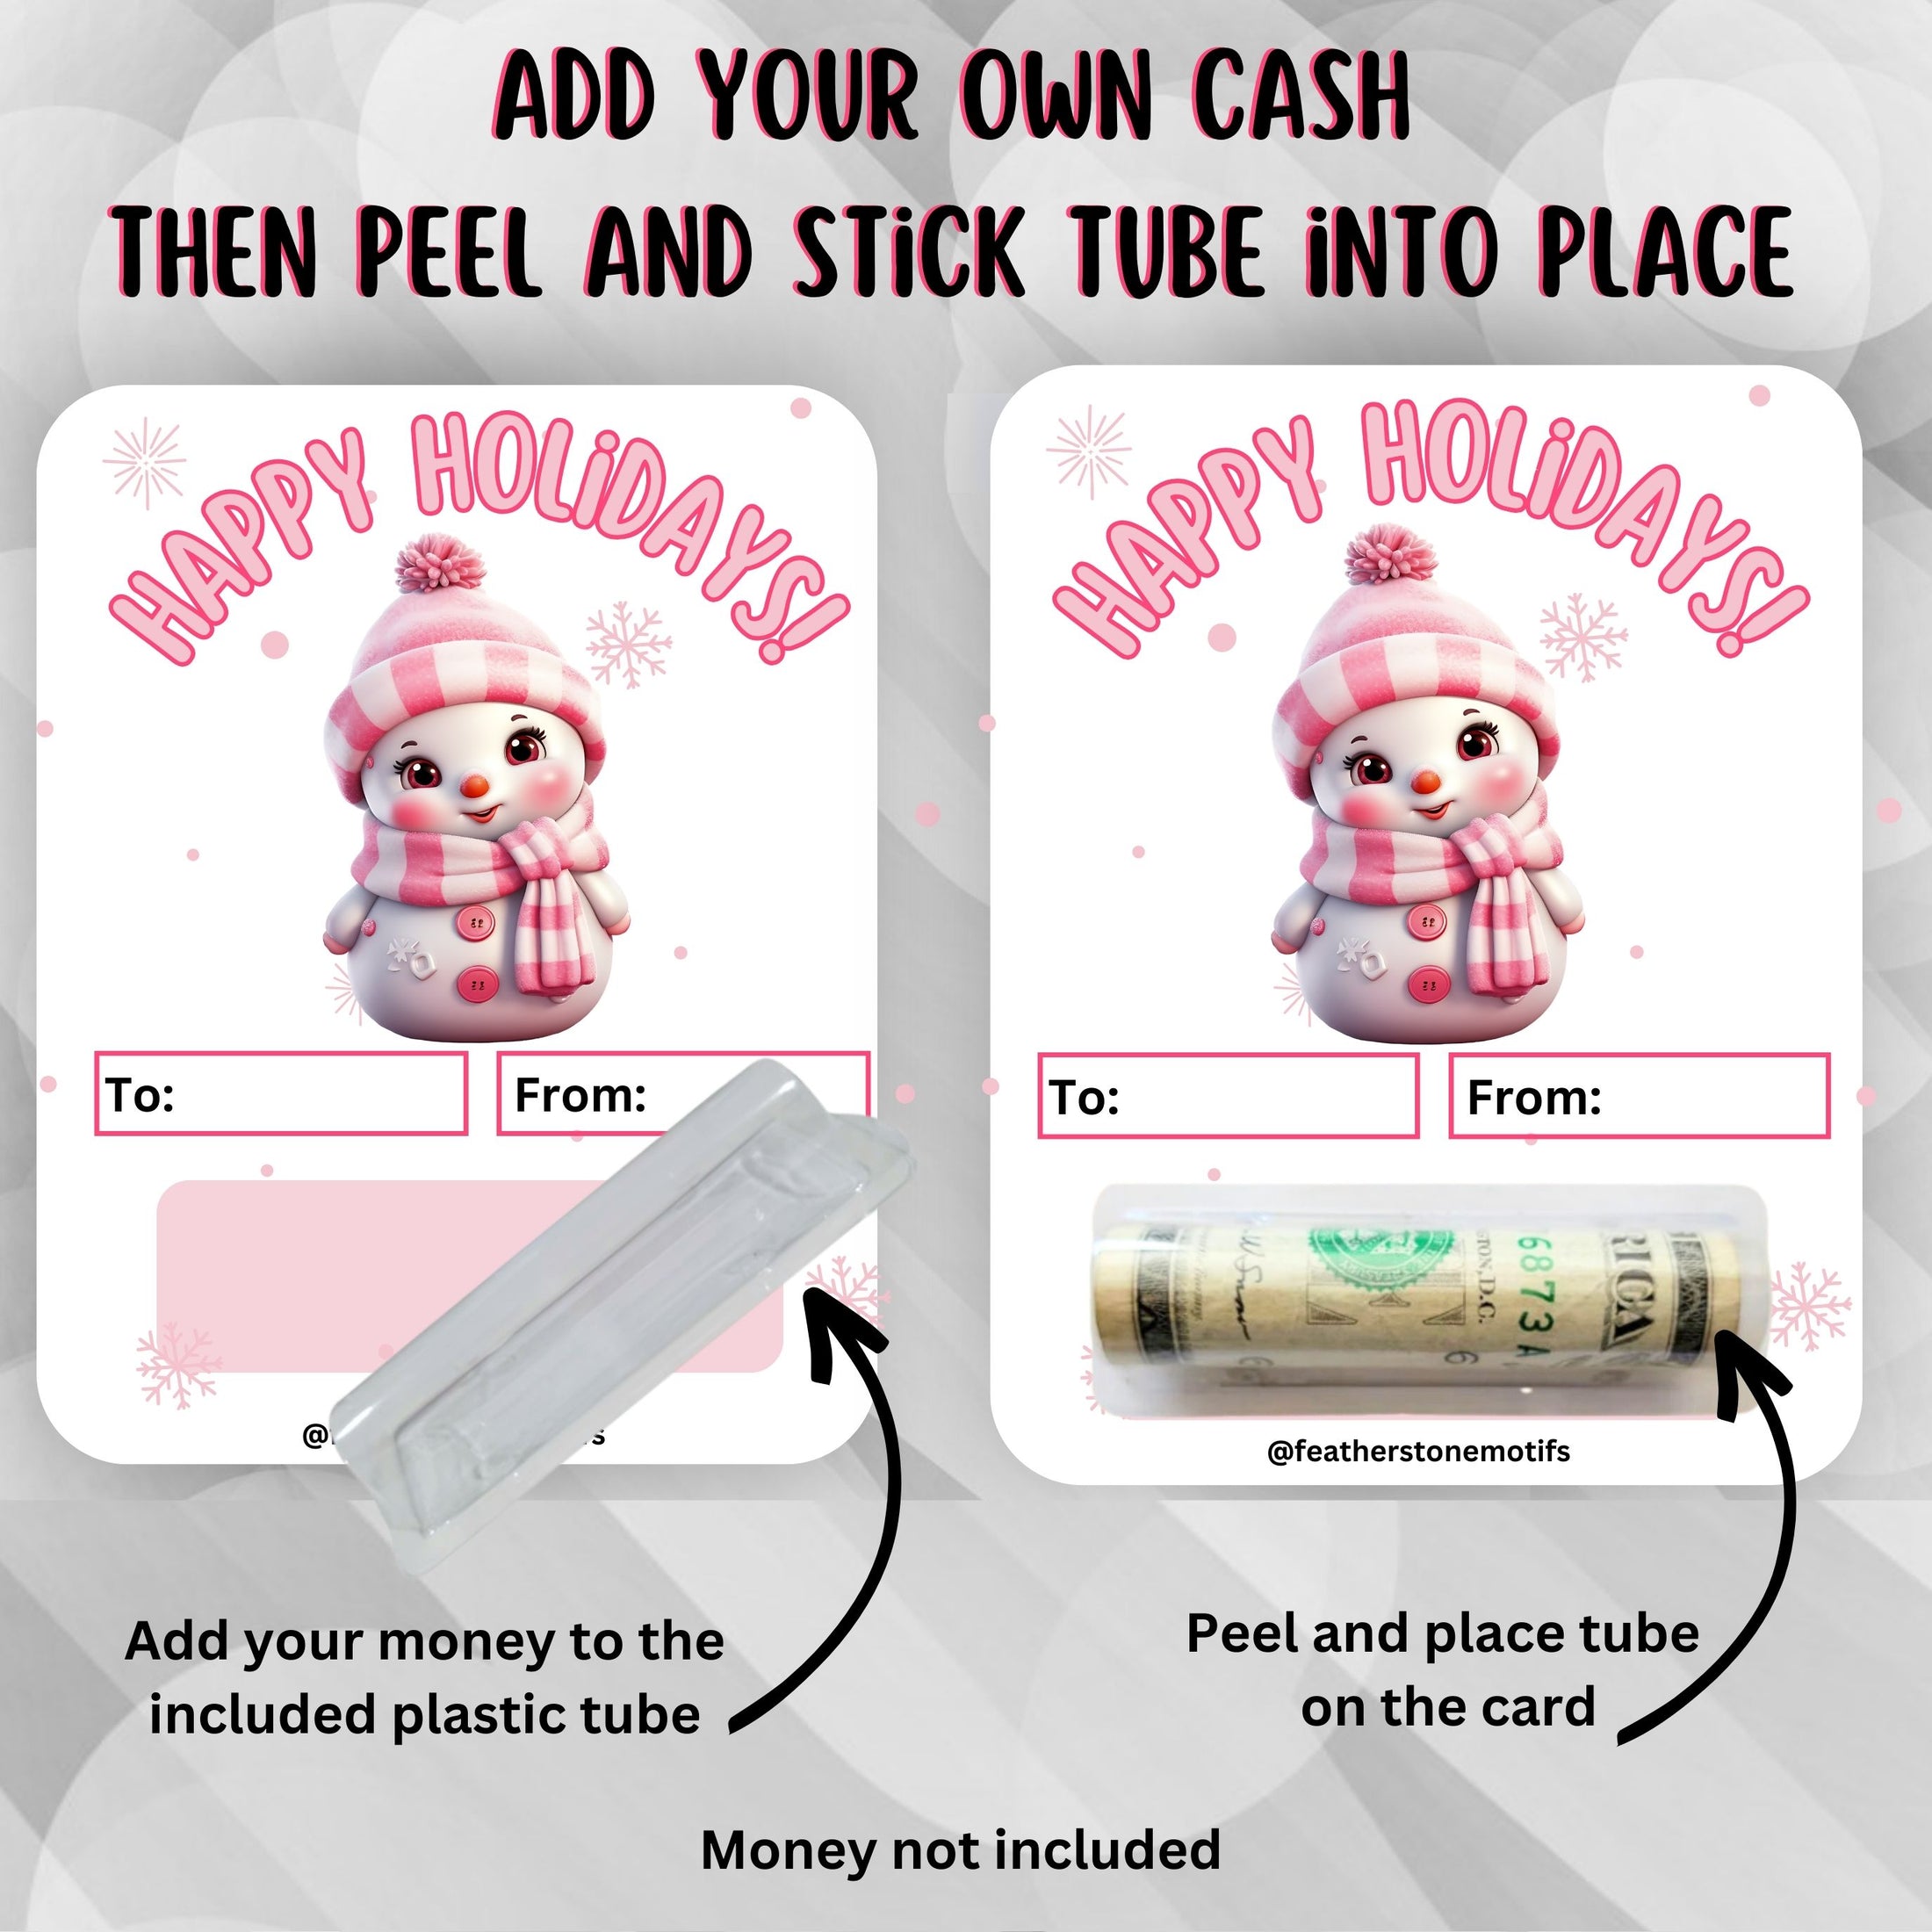 This image shows how to apply the money tube to the Pink Snowman money card.